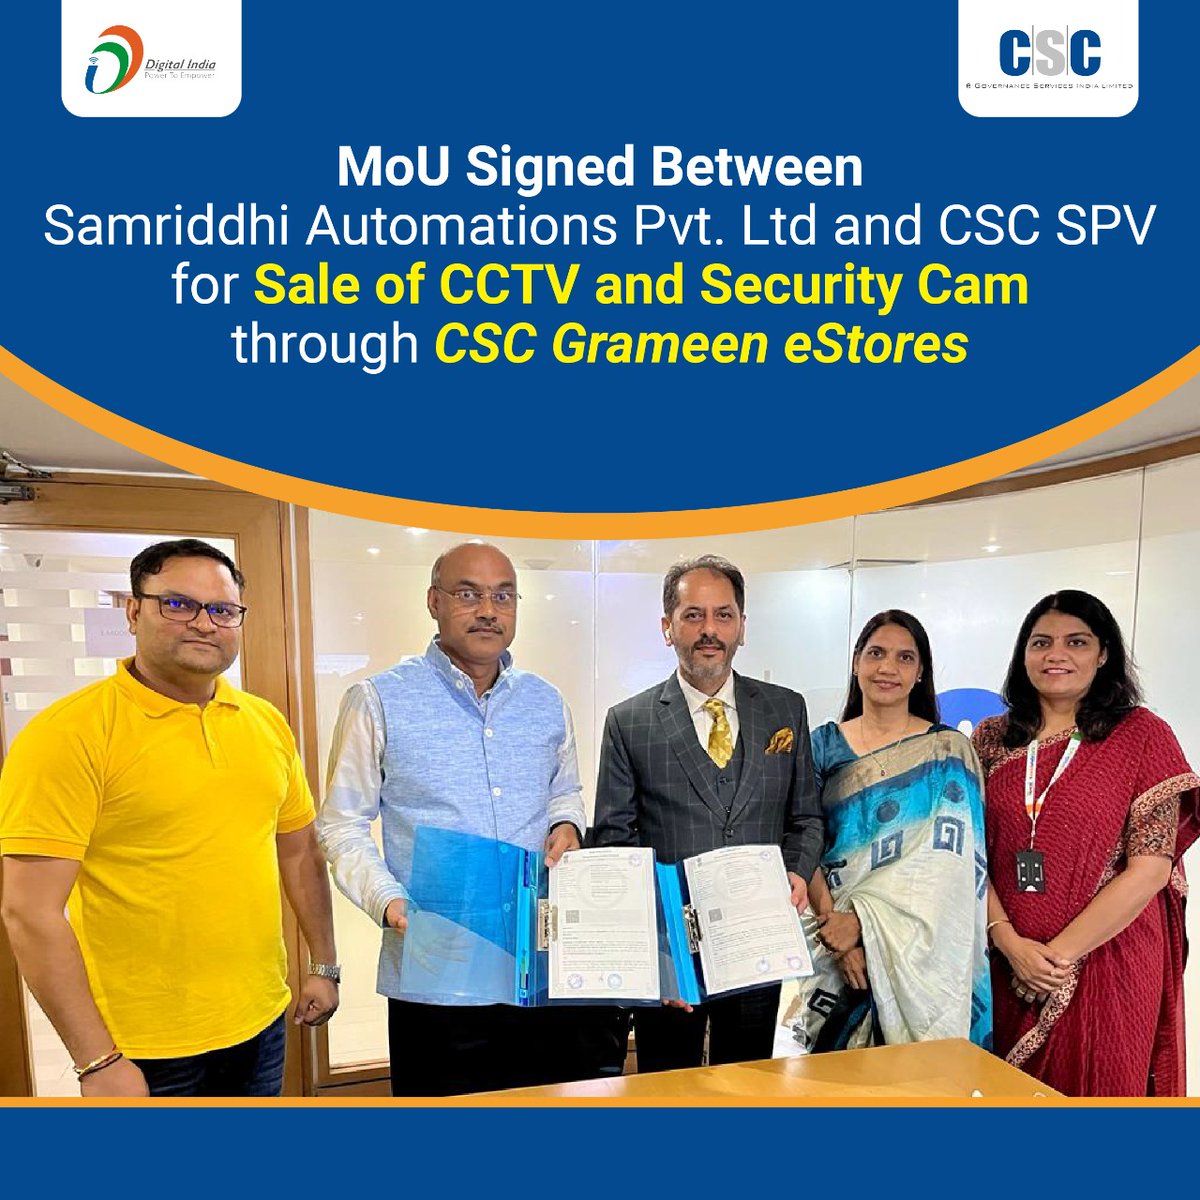 MoU Signed Between Samriddhi Automations Pvt. Ltd and CSC SPV for Sale of CCTV and Security Cam through CSC Grameen eStore.

#CSC #DigitalIndia #RuralEmpowerment #CSCGrameenEStore #SparshCCTV #SparshSecurity